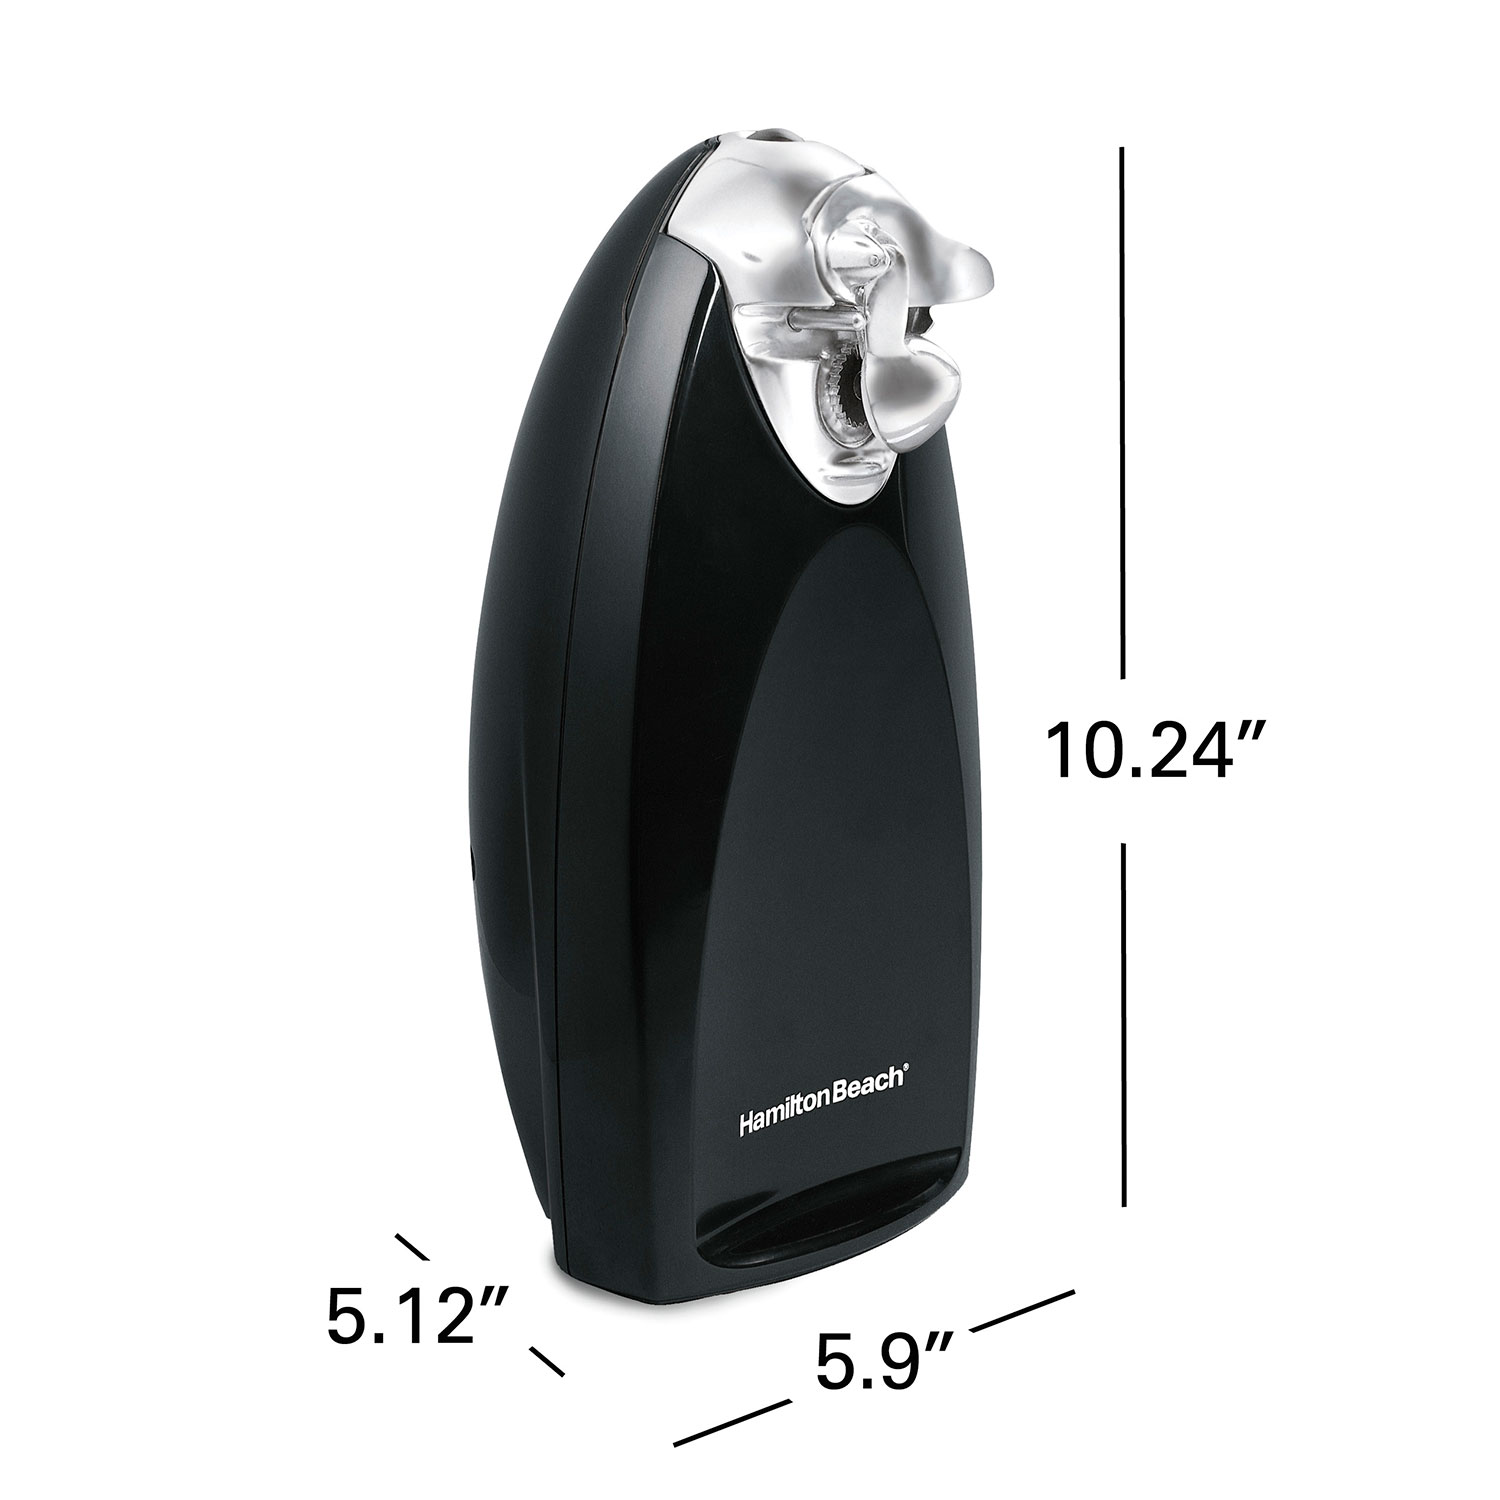  Hamilton Beach 2-in-1 Electric Automatic Can Opener